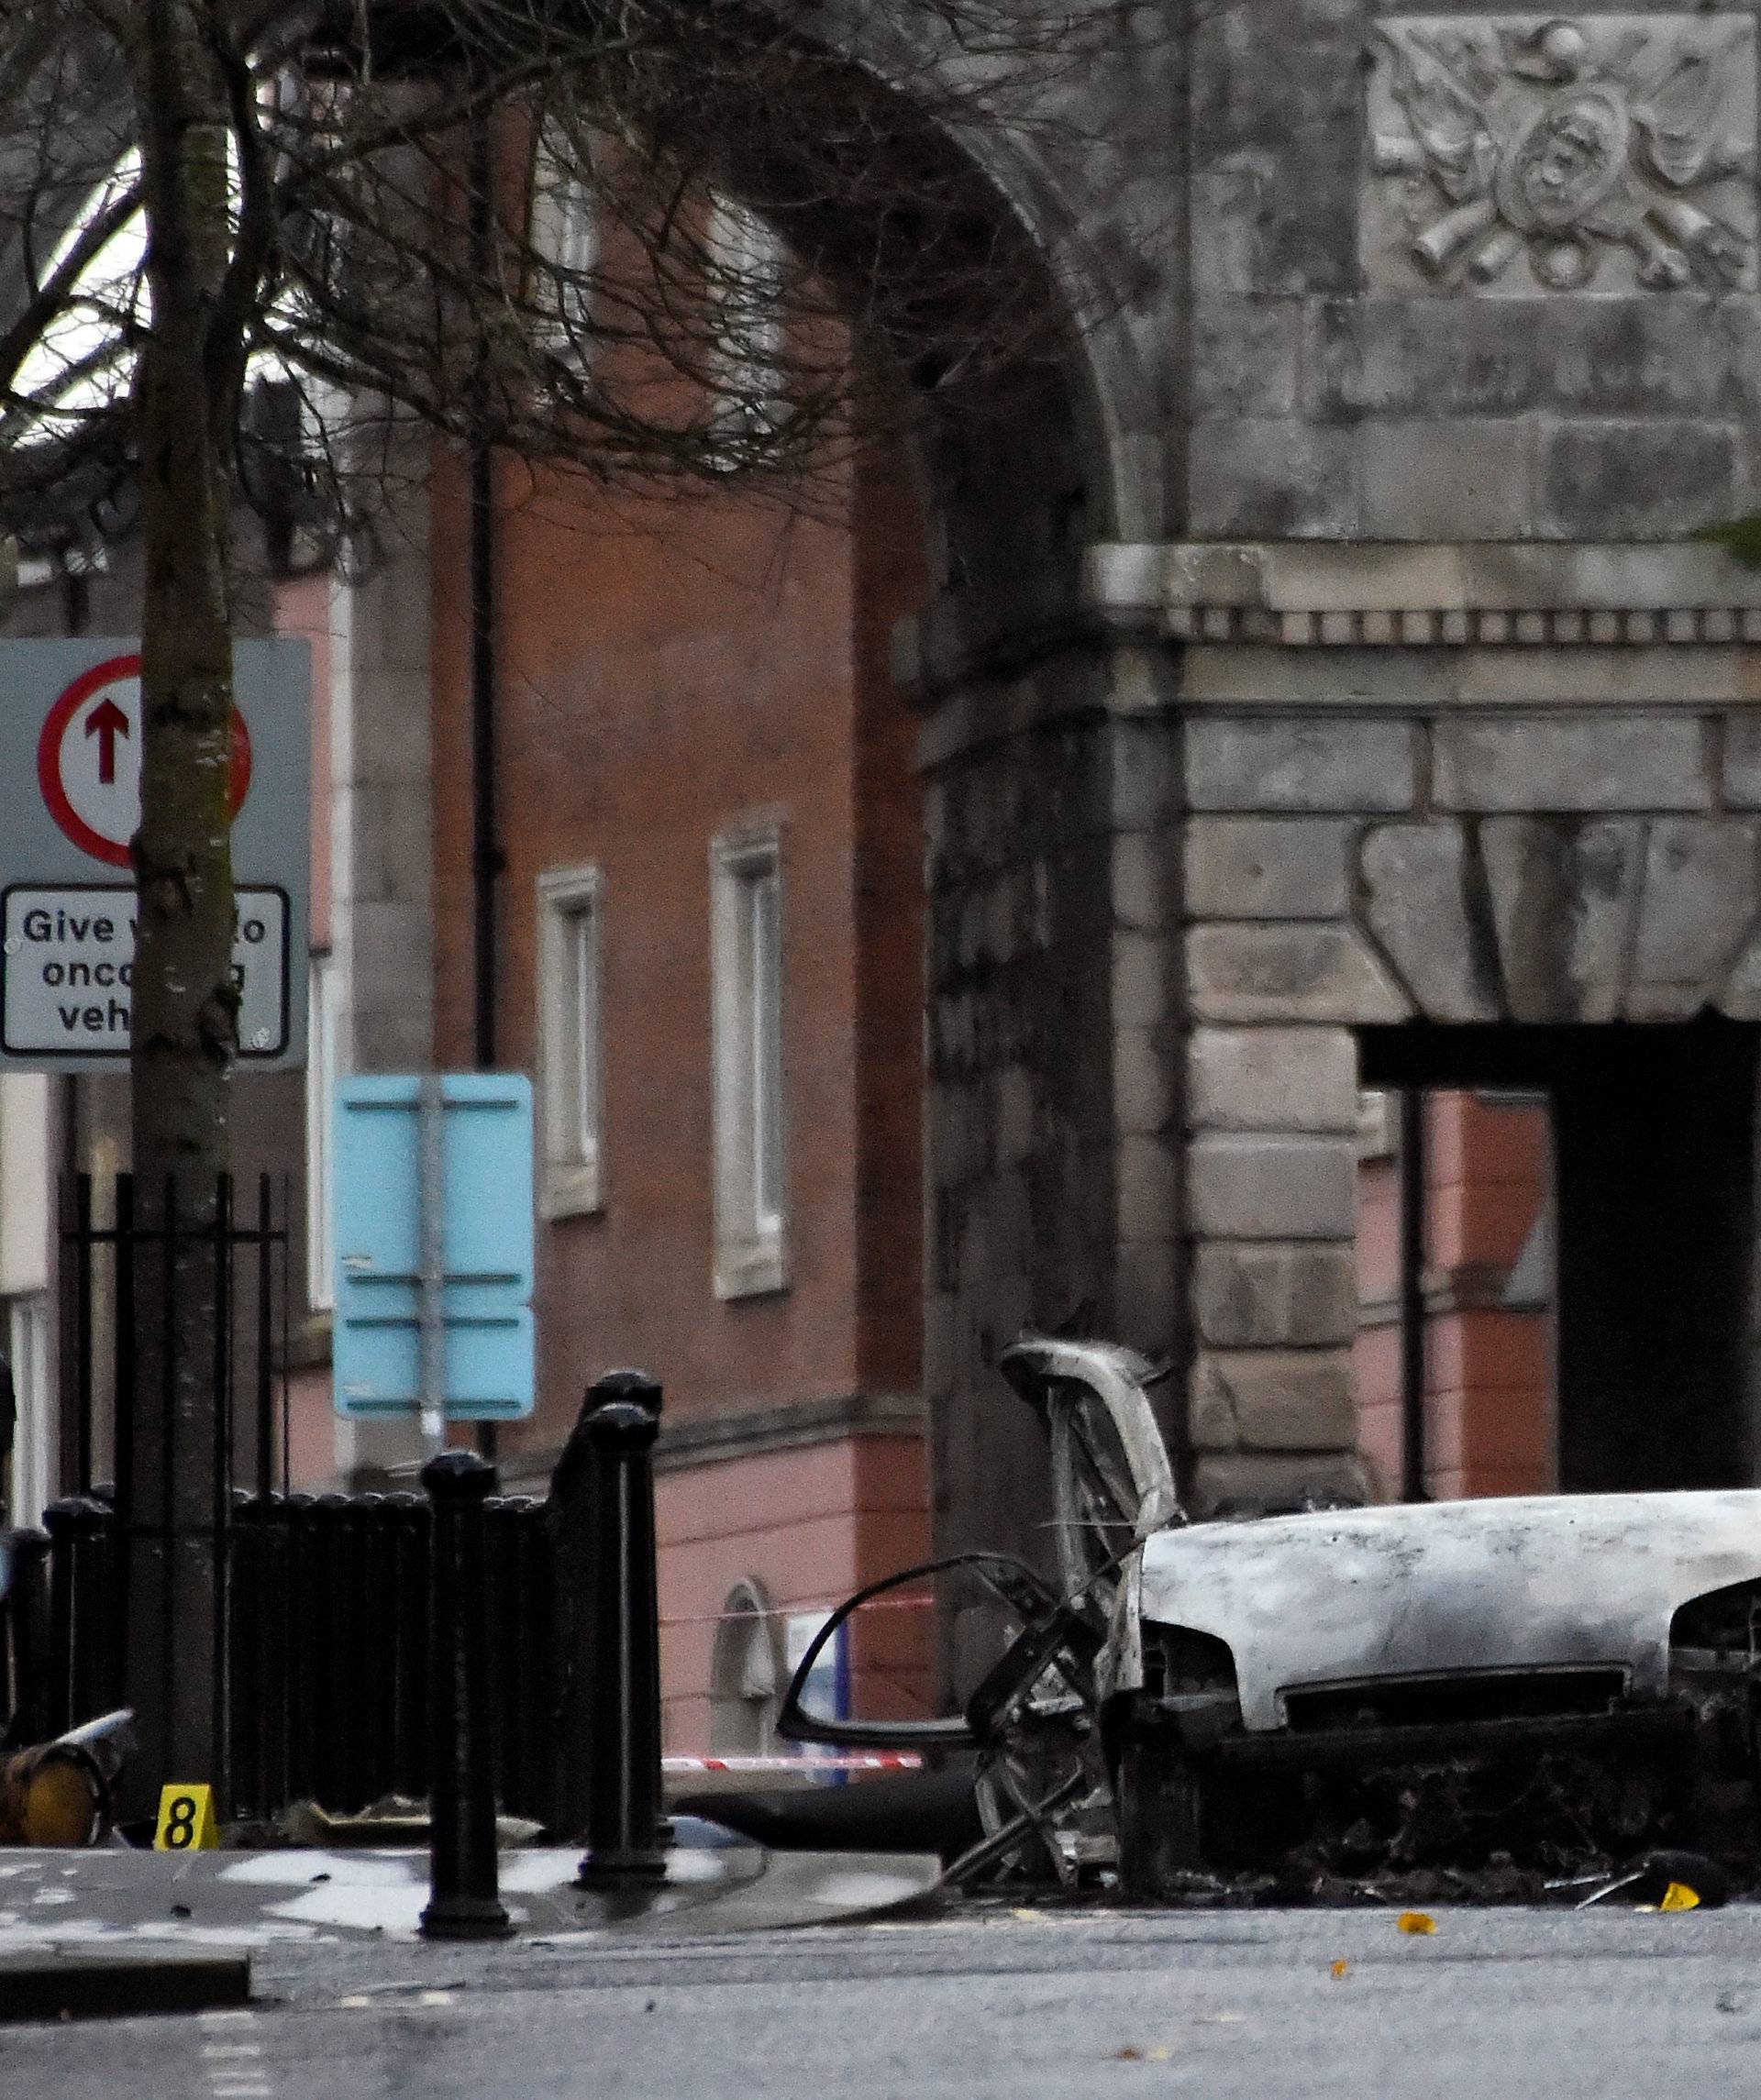 Forensic officers arrive at the scene of a suspected car bomb in Londonderry